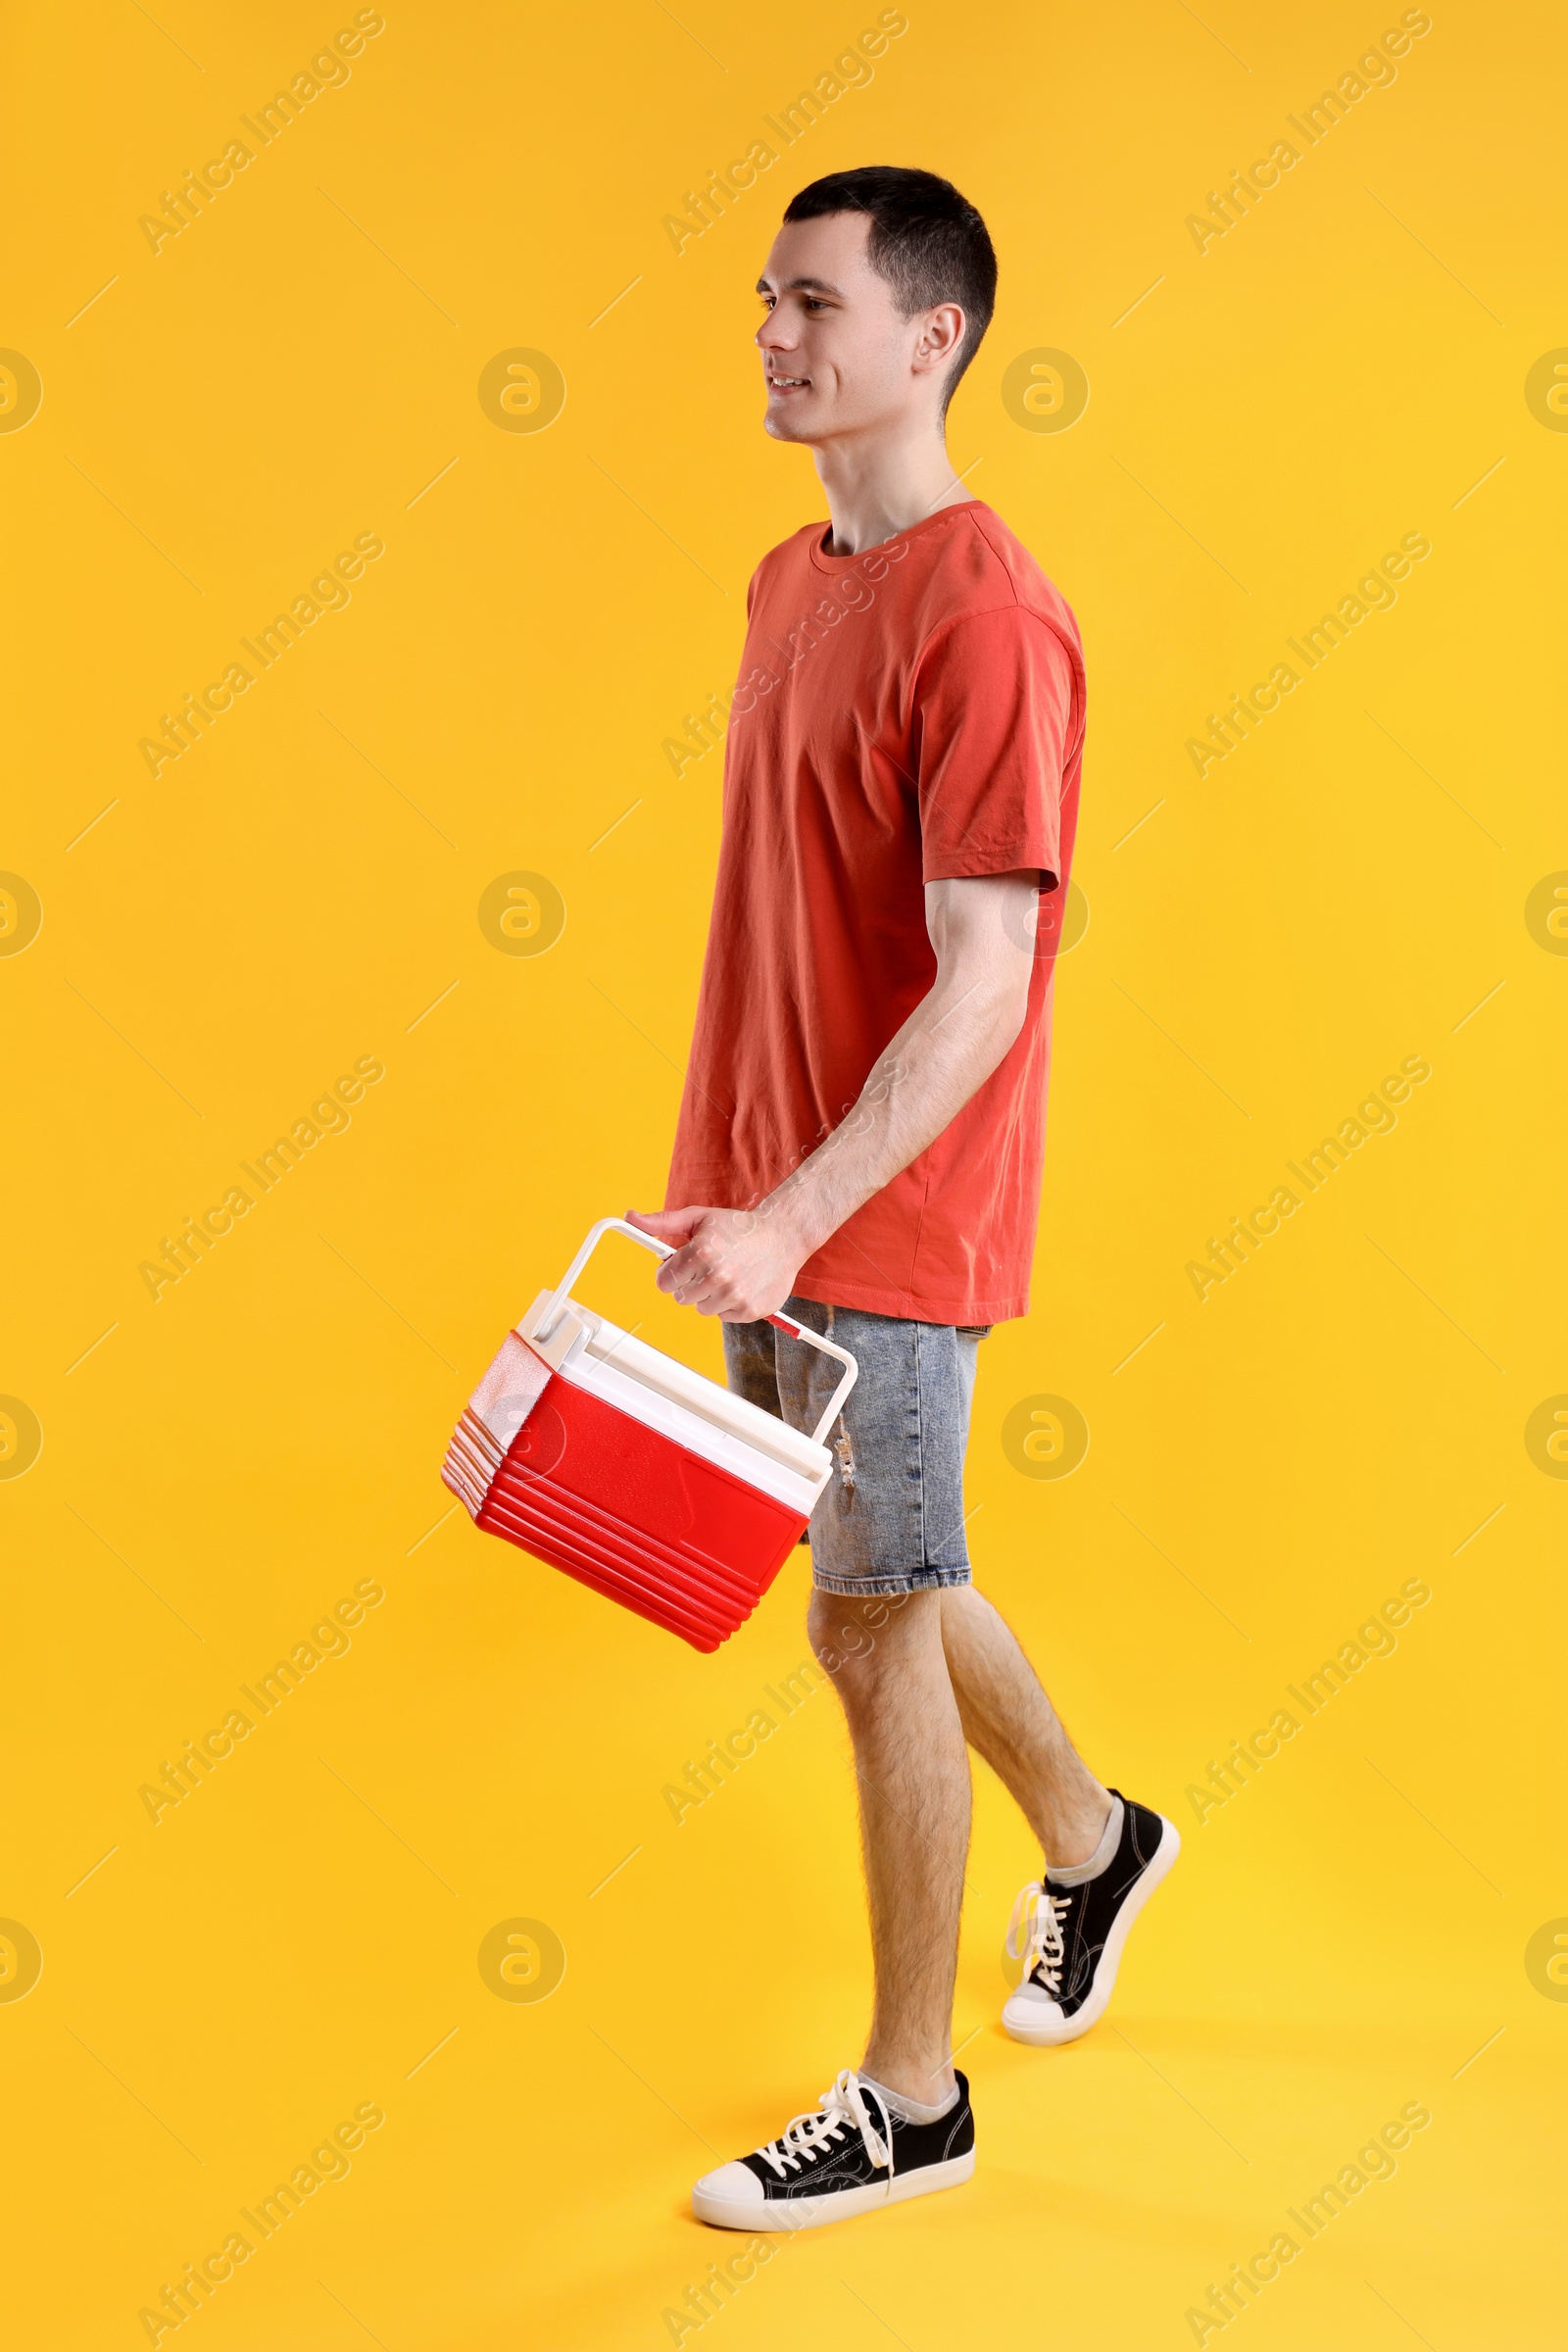 Photo of Man with red cool box walking on orange background